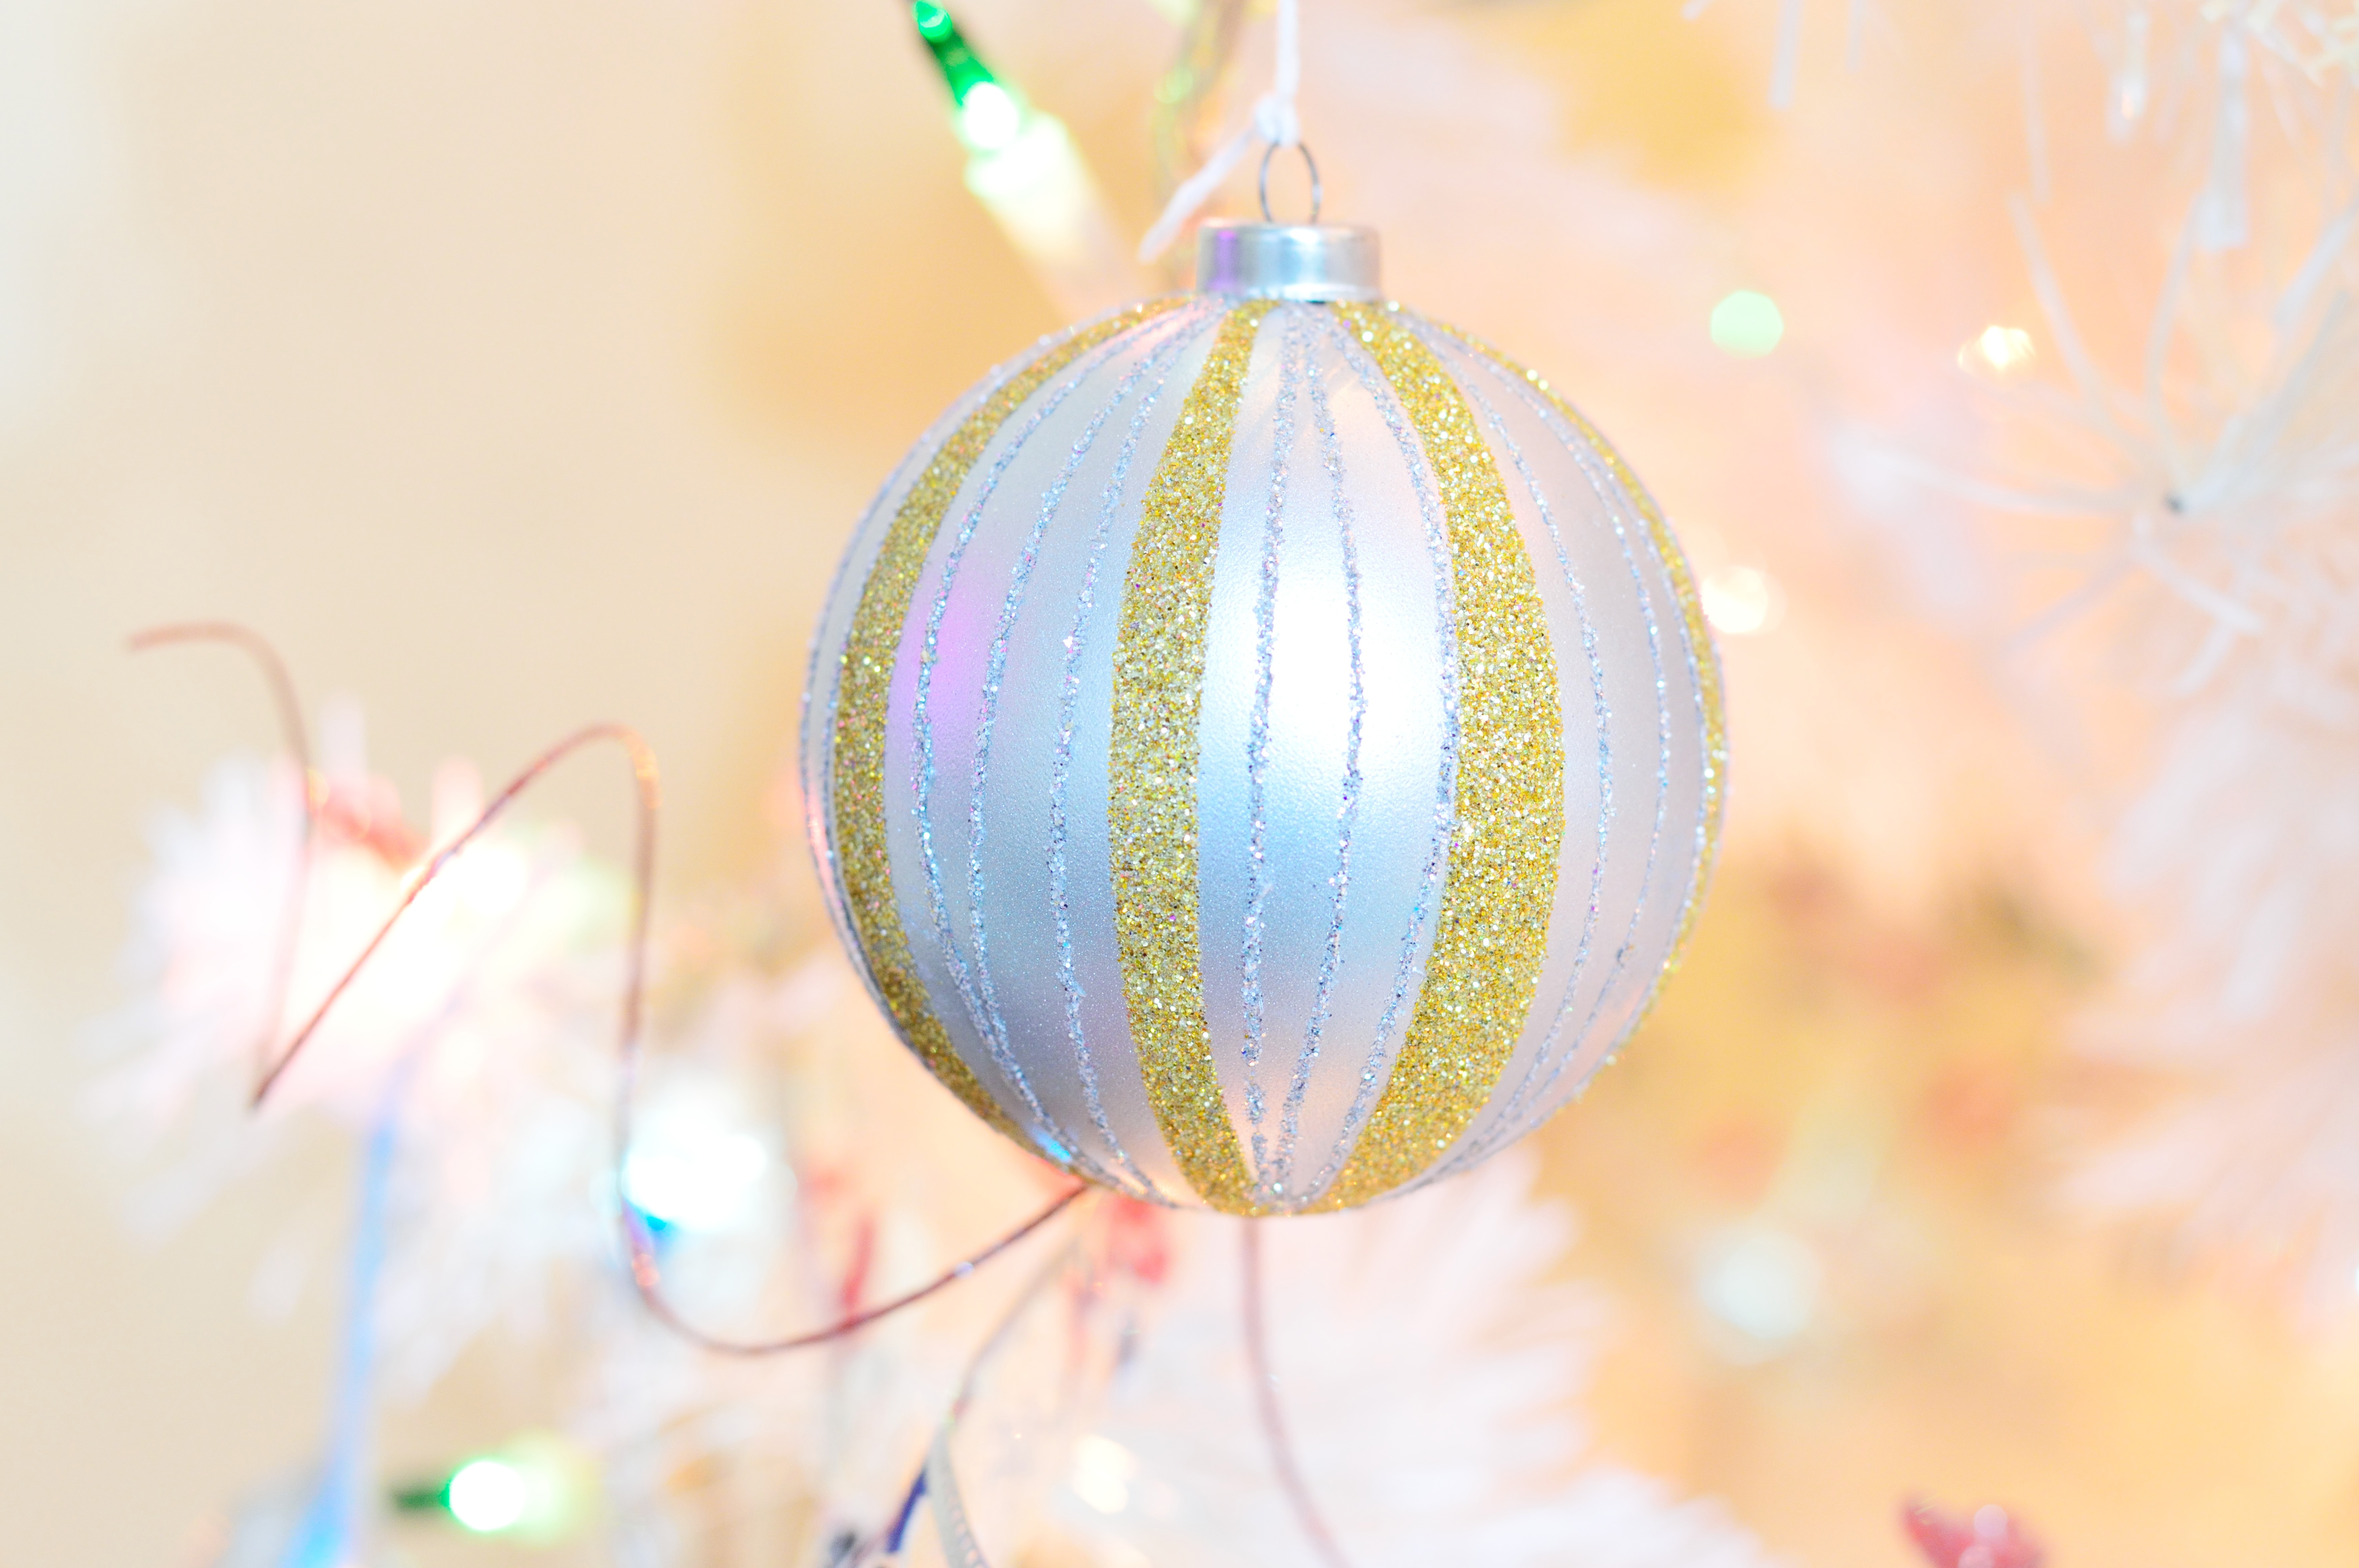 close-up photography of white and yellow baubles